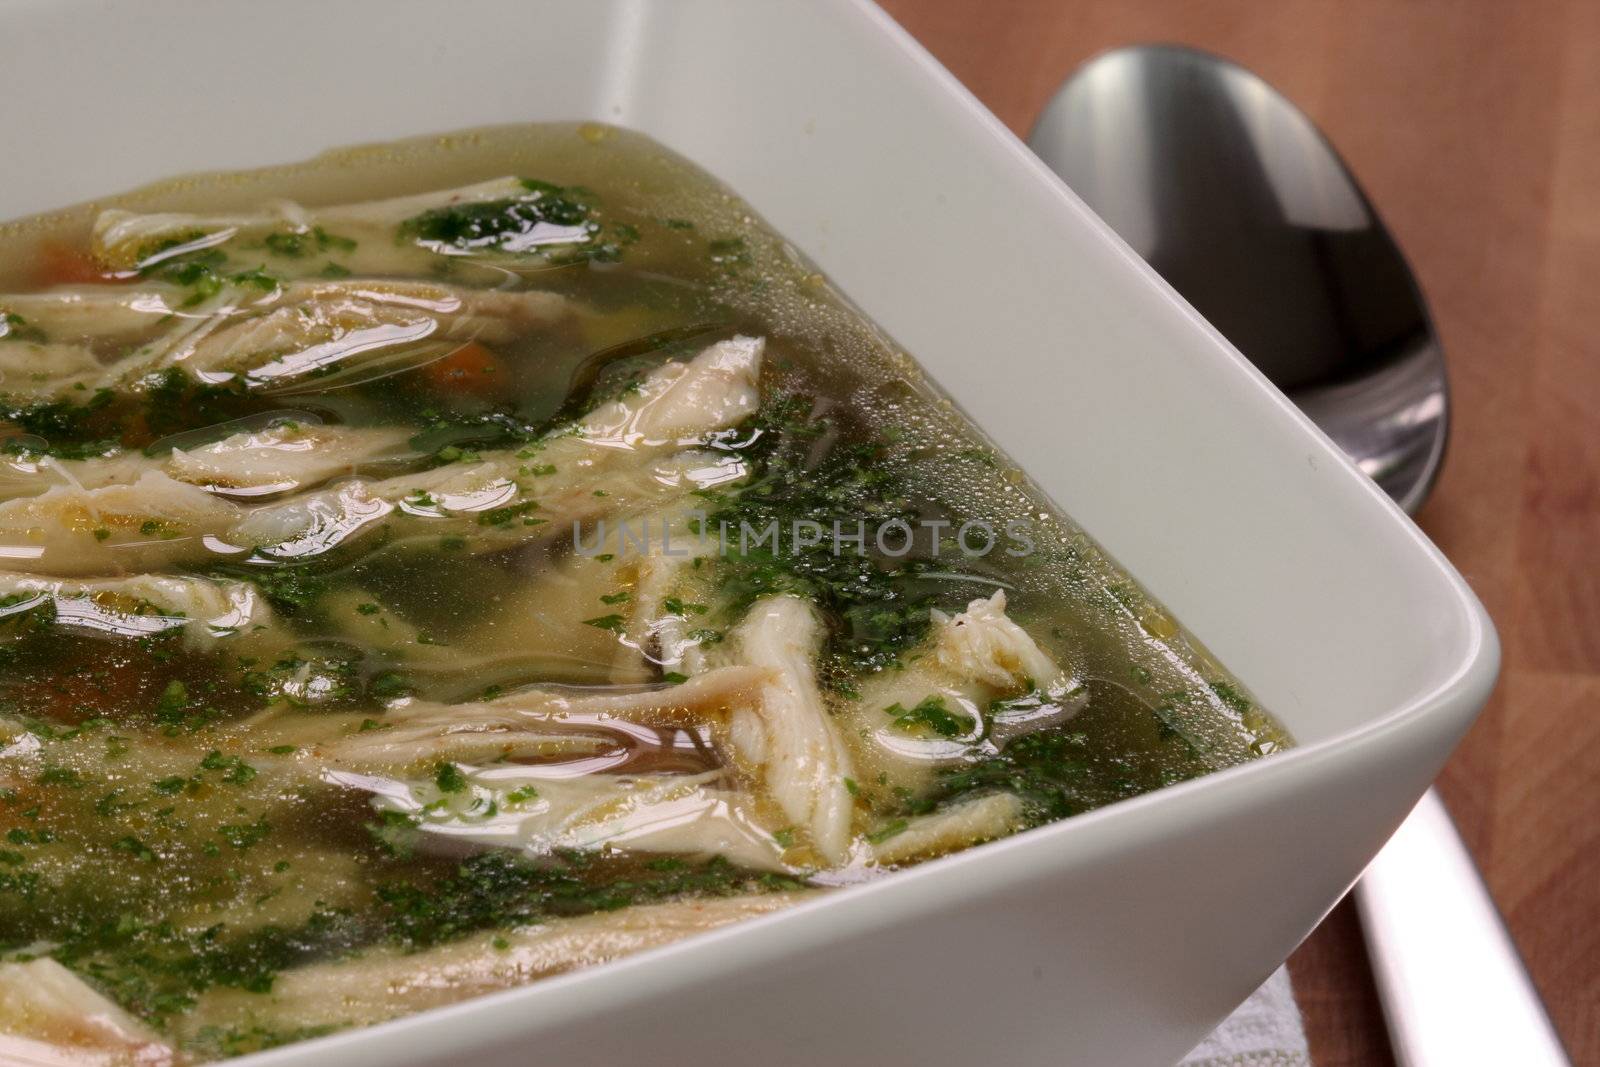 chicken and veggies soup by tacar